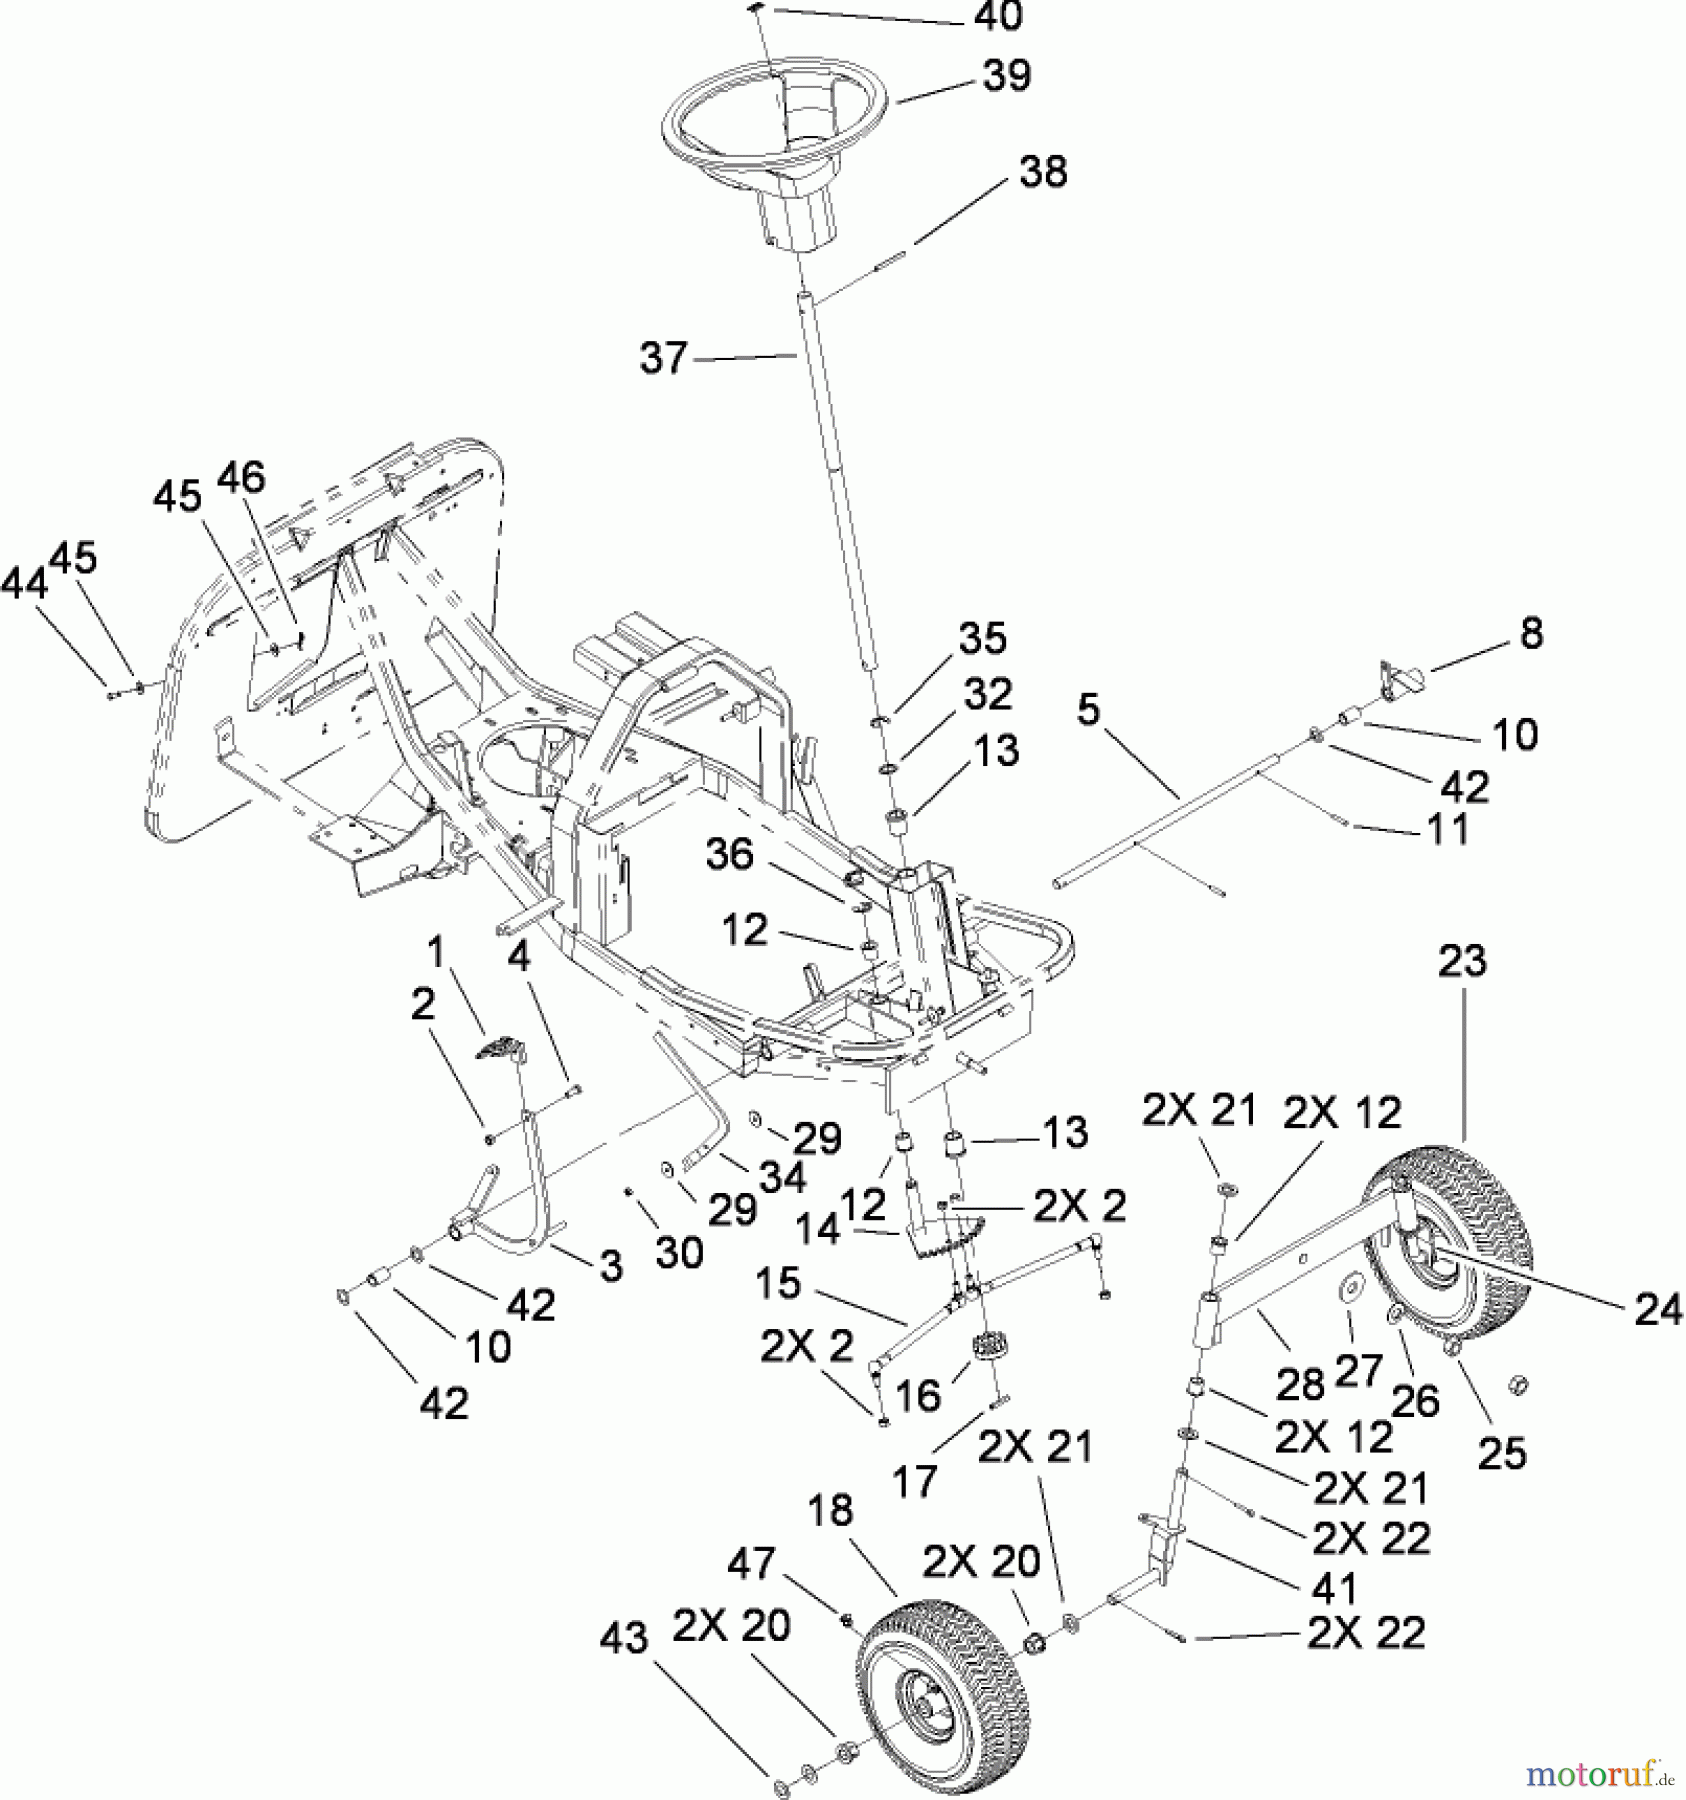  Toro Neu Mowers, Rear-Engine Rider 70185 (G132) - Toro G132 Rear-Engine Riding Mower, 2009 (280899565-290999999) FRONT AXLE AND STEERING ASSEMBLY